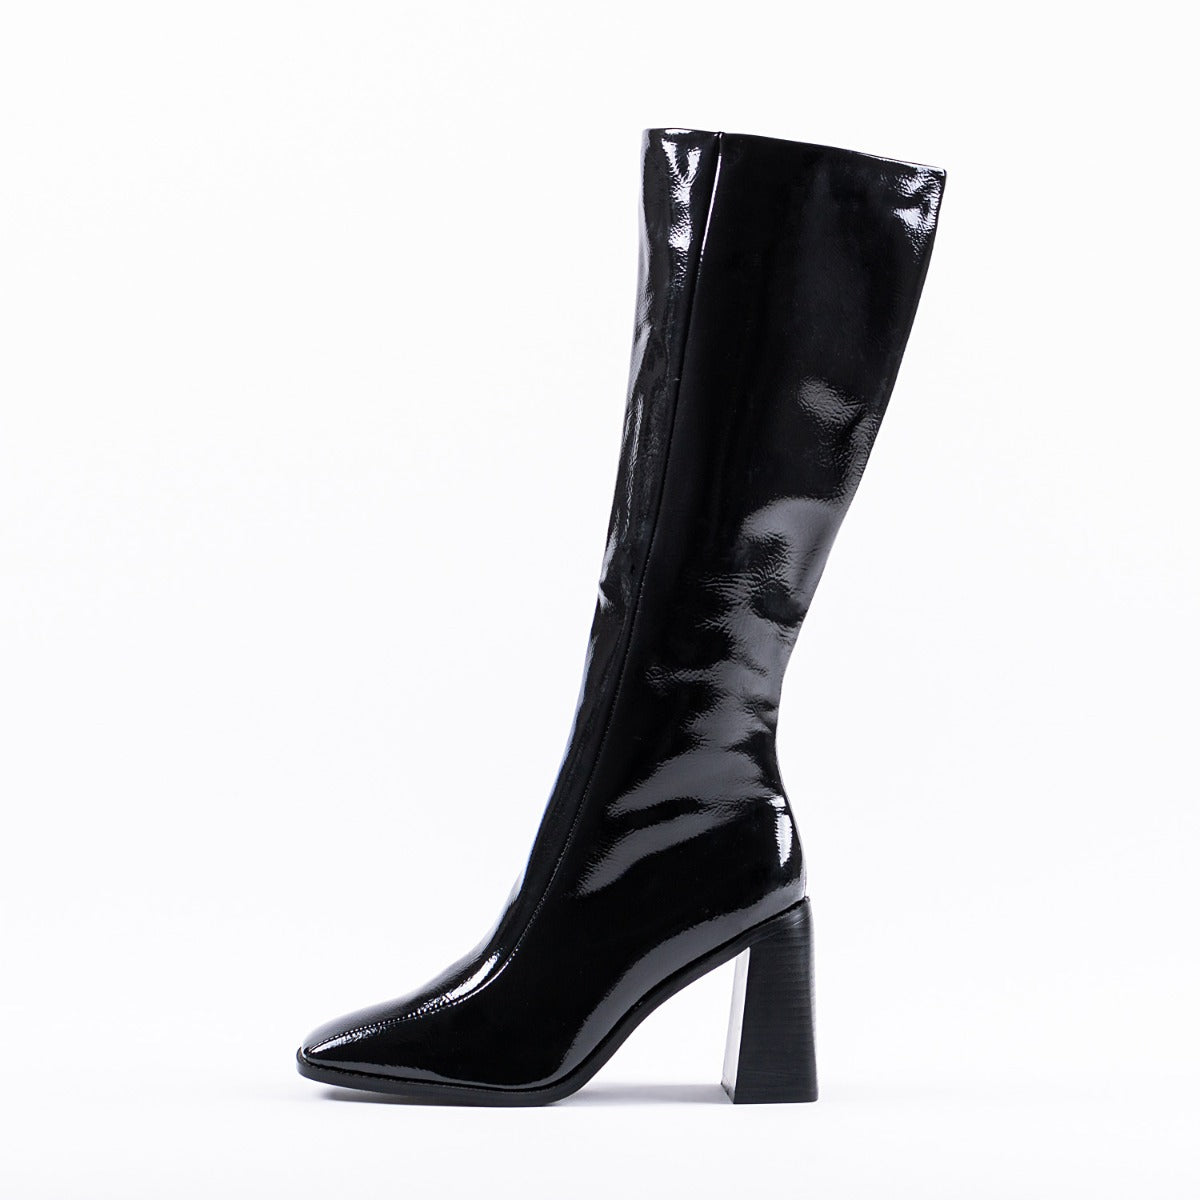 RAID LENORE Knee High Boots in Black Crinkle Patent